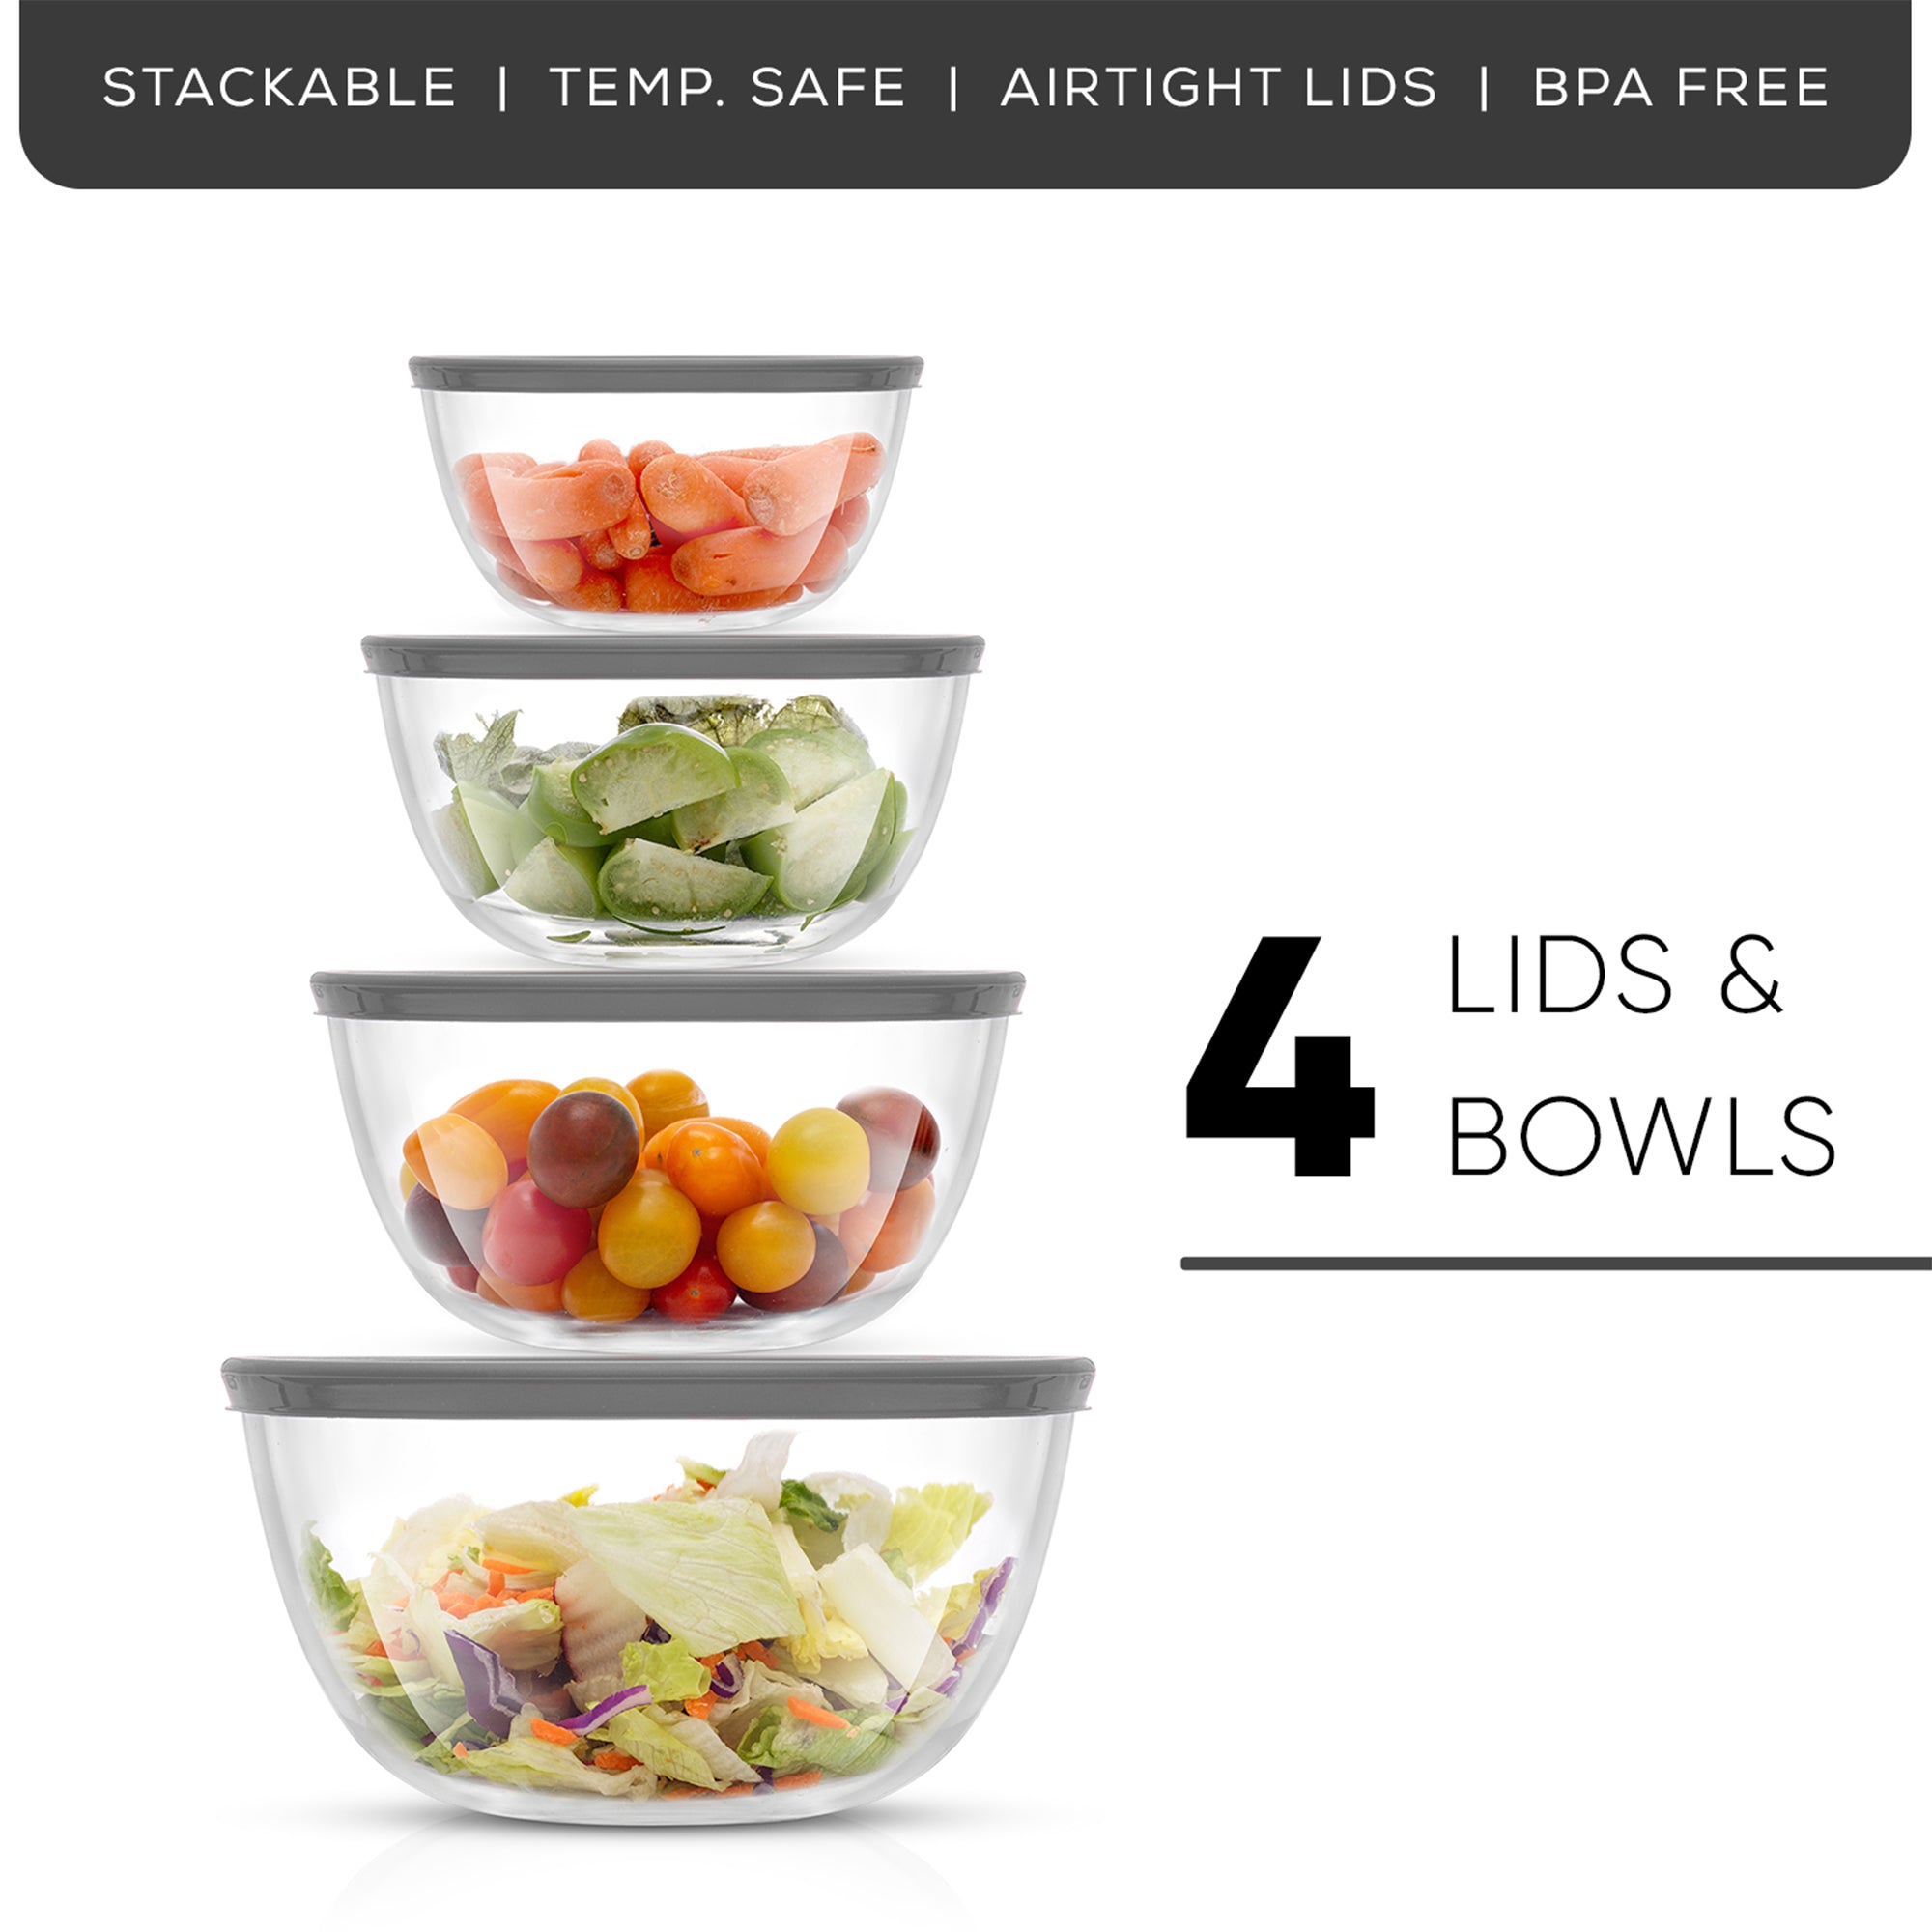 A stack of four round, clear glass bowls with gray lids sits on a white background. The bowls are arranged from largest to smallest. Text overlay reads  “STACKABLE |  TEMP. SAFE |  AIRTIGHT LIDS |     BPA FREE  | 4  LIDS &  BOWLS”.